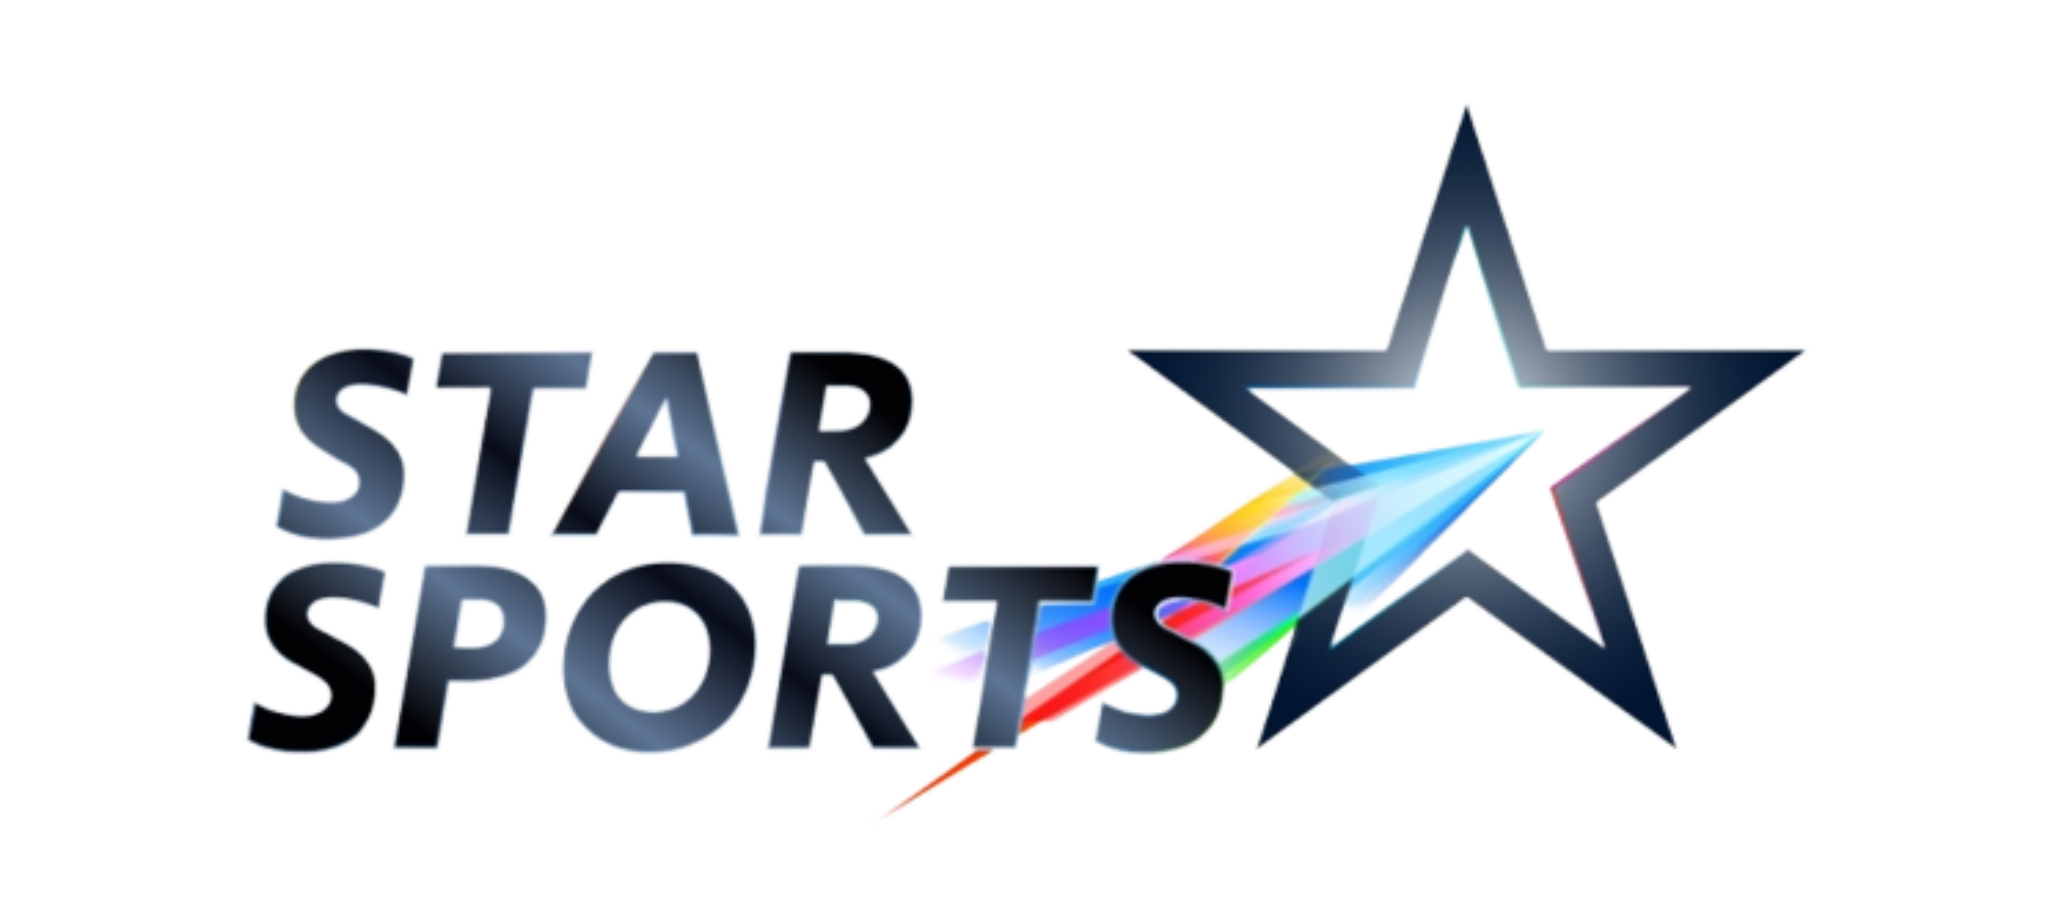 star-sports-logo-png-removebg-preview